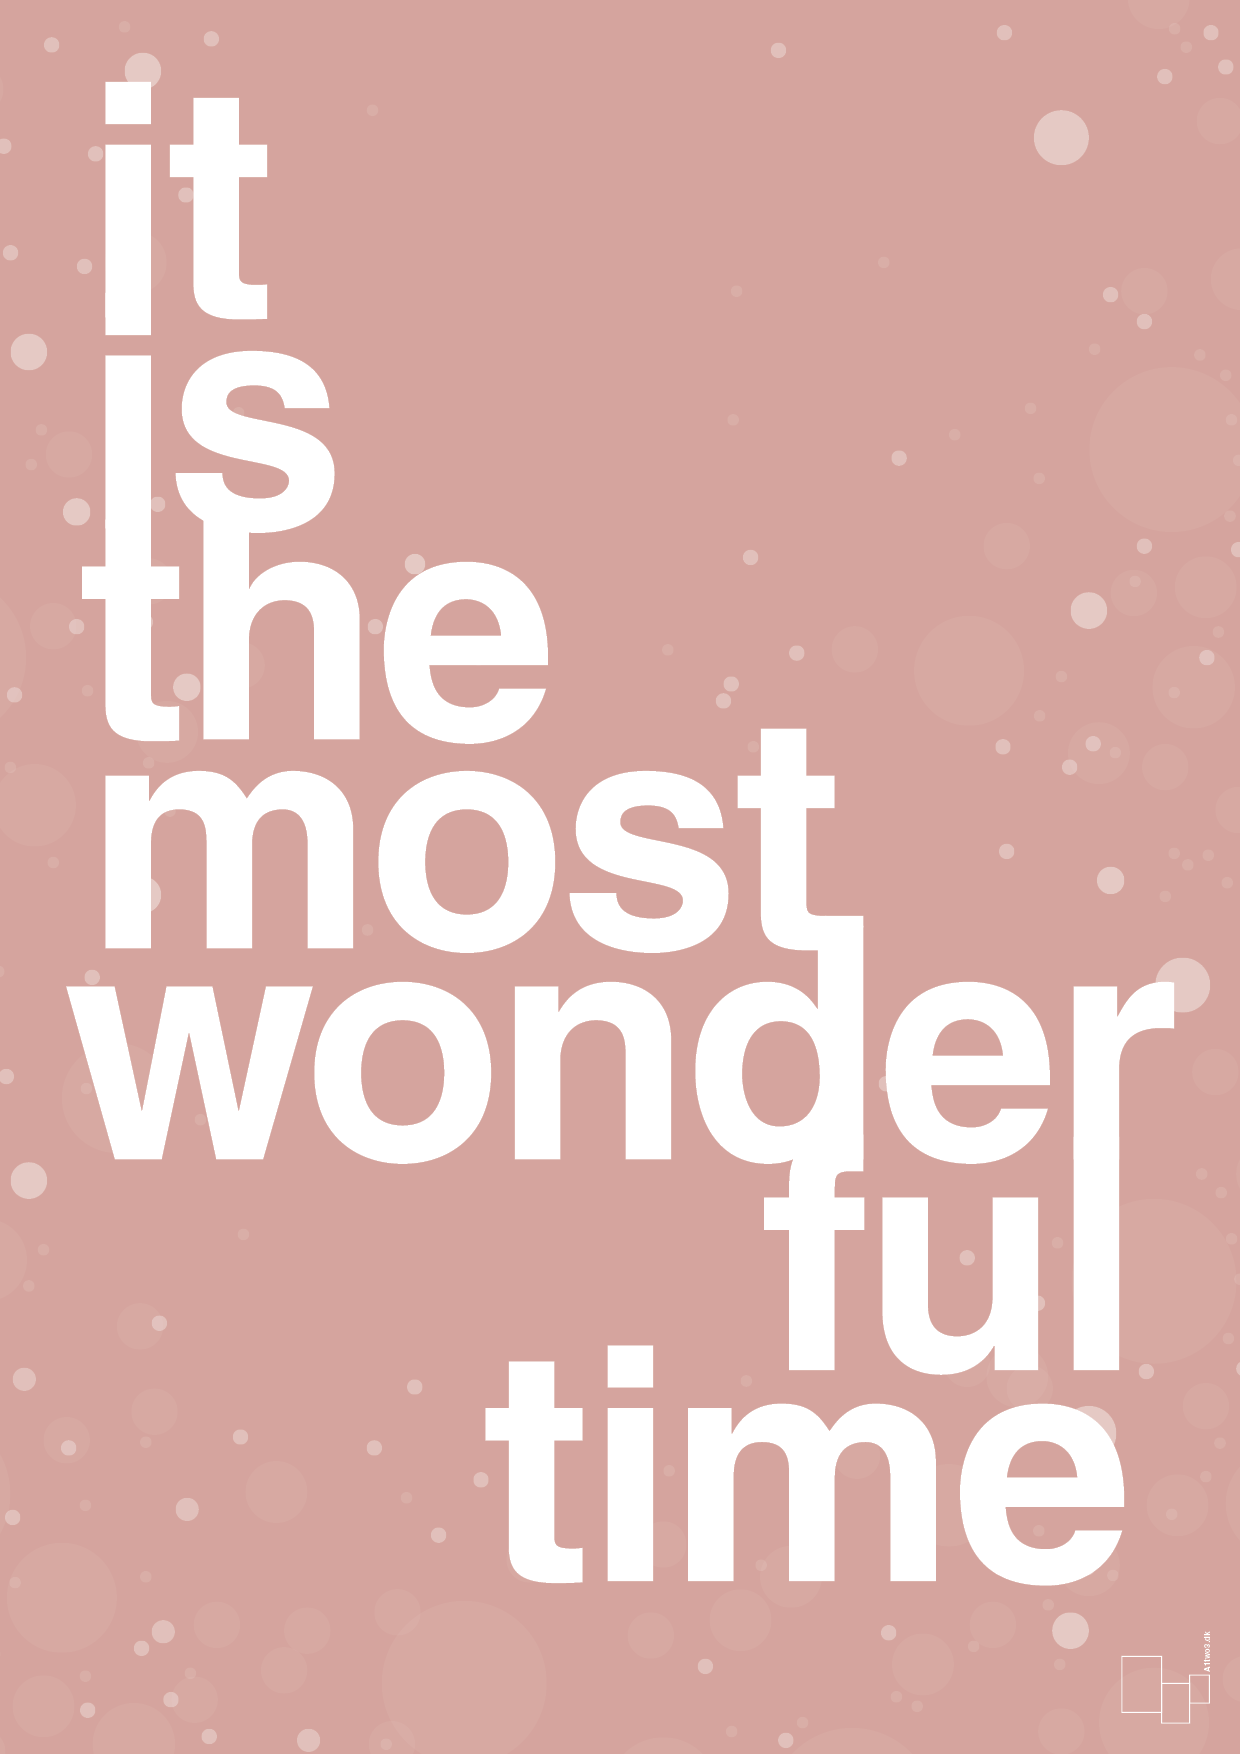 it is the most wonderful time - Plakat med Begivenheder i Bubble Shell